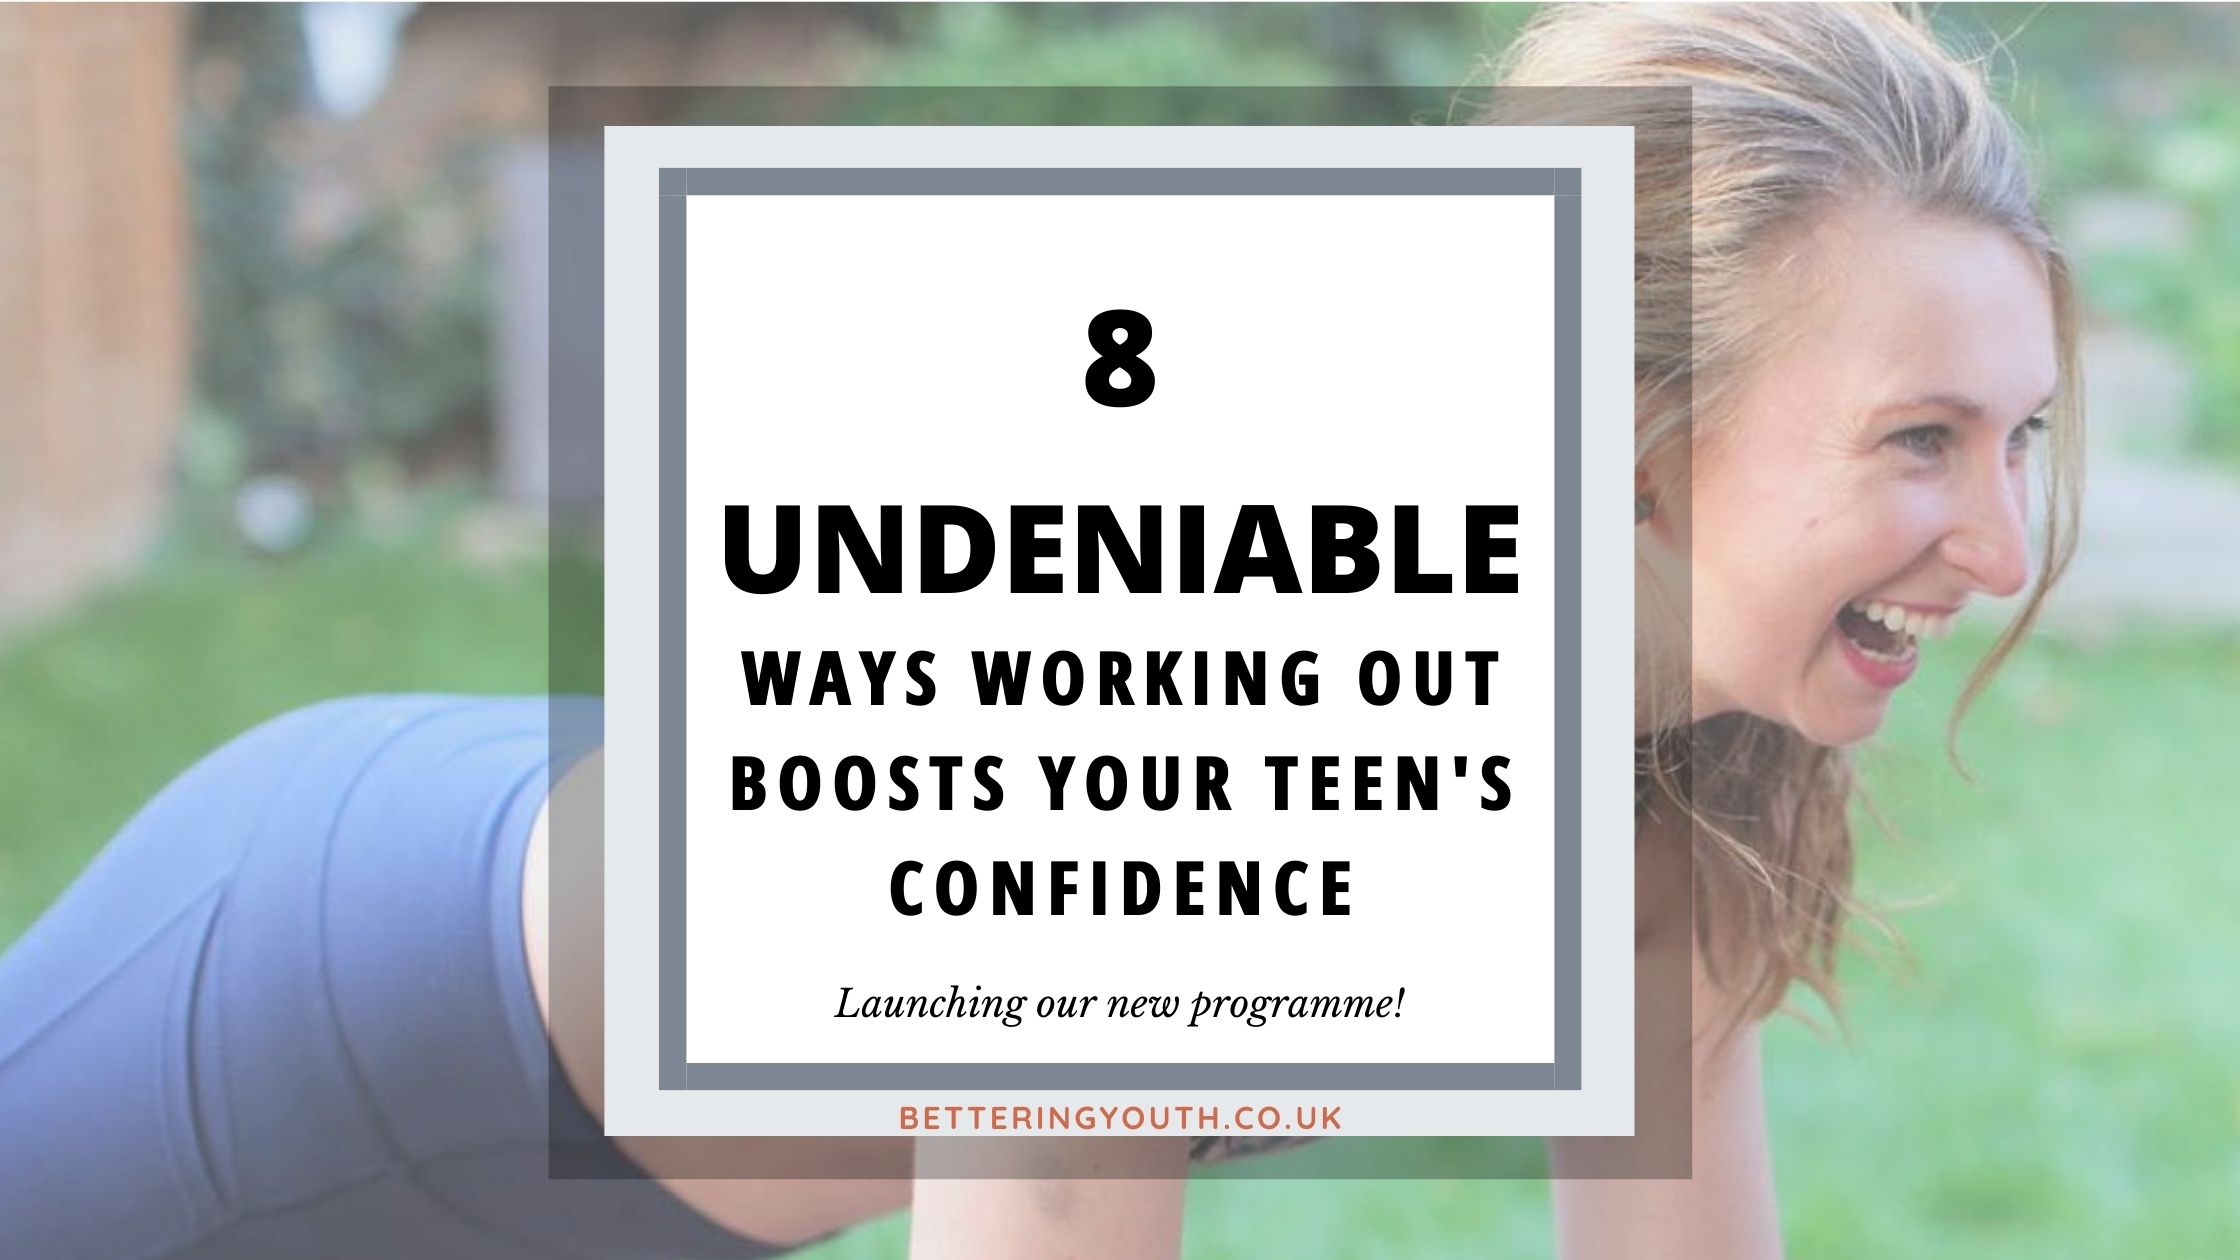 8 Ways Working Out Boosts Confidence for Your Teen